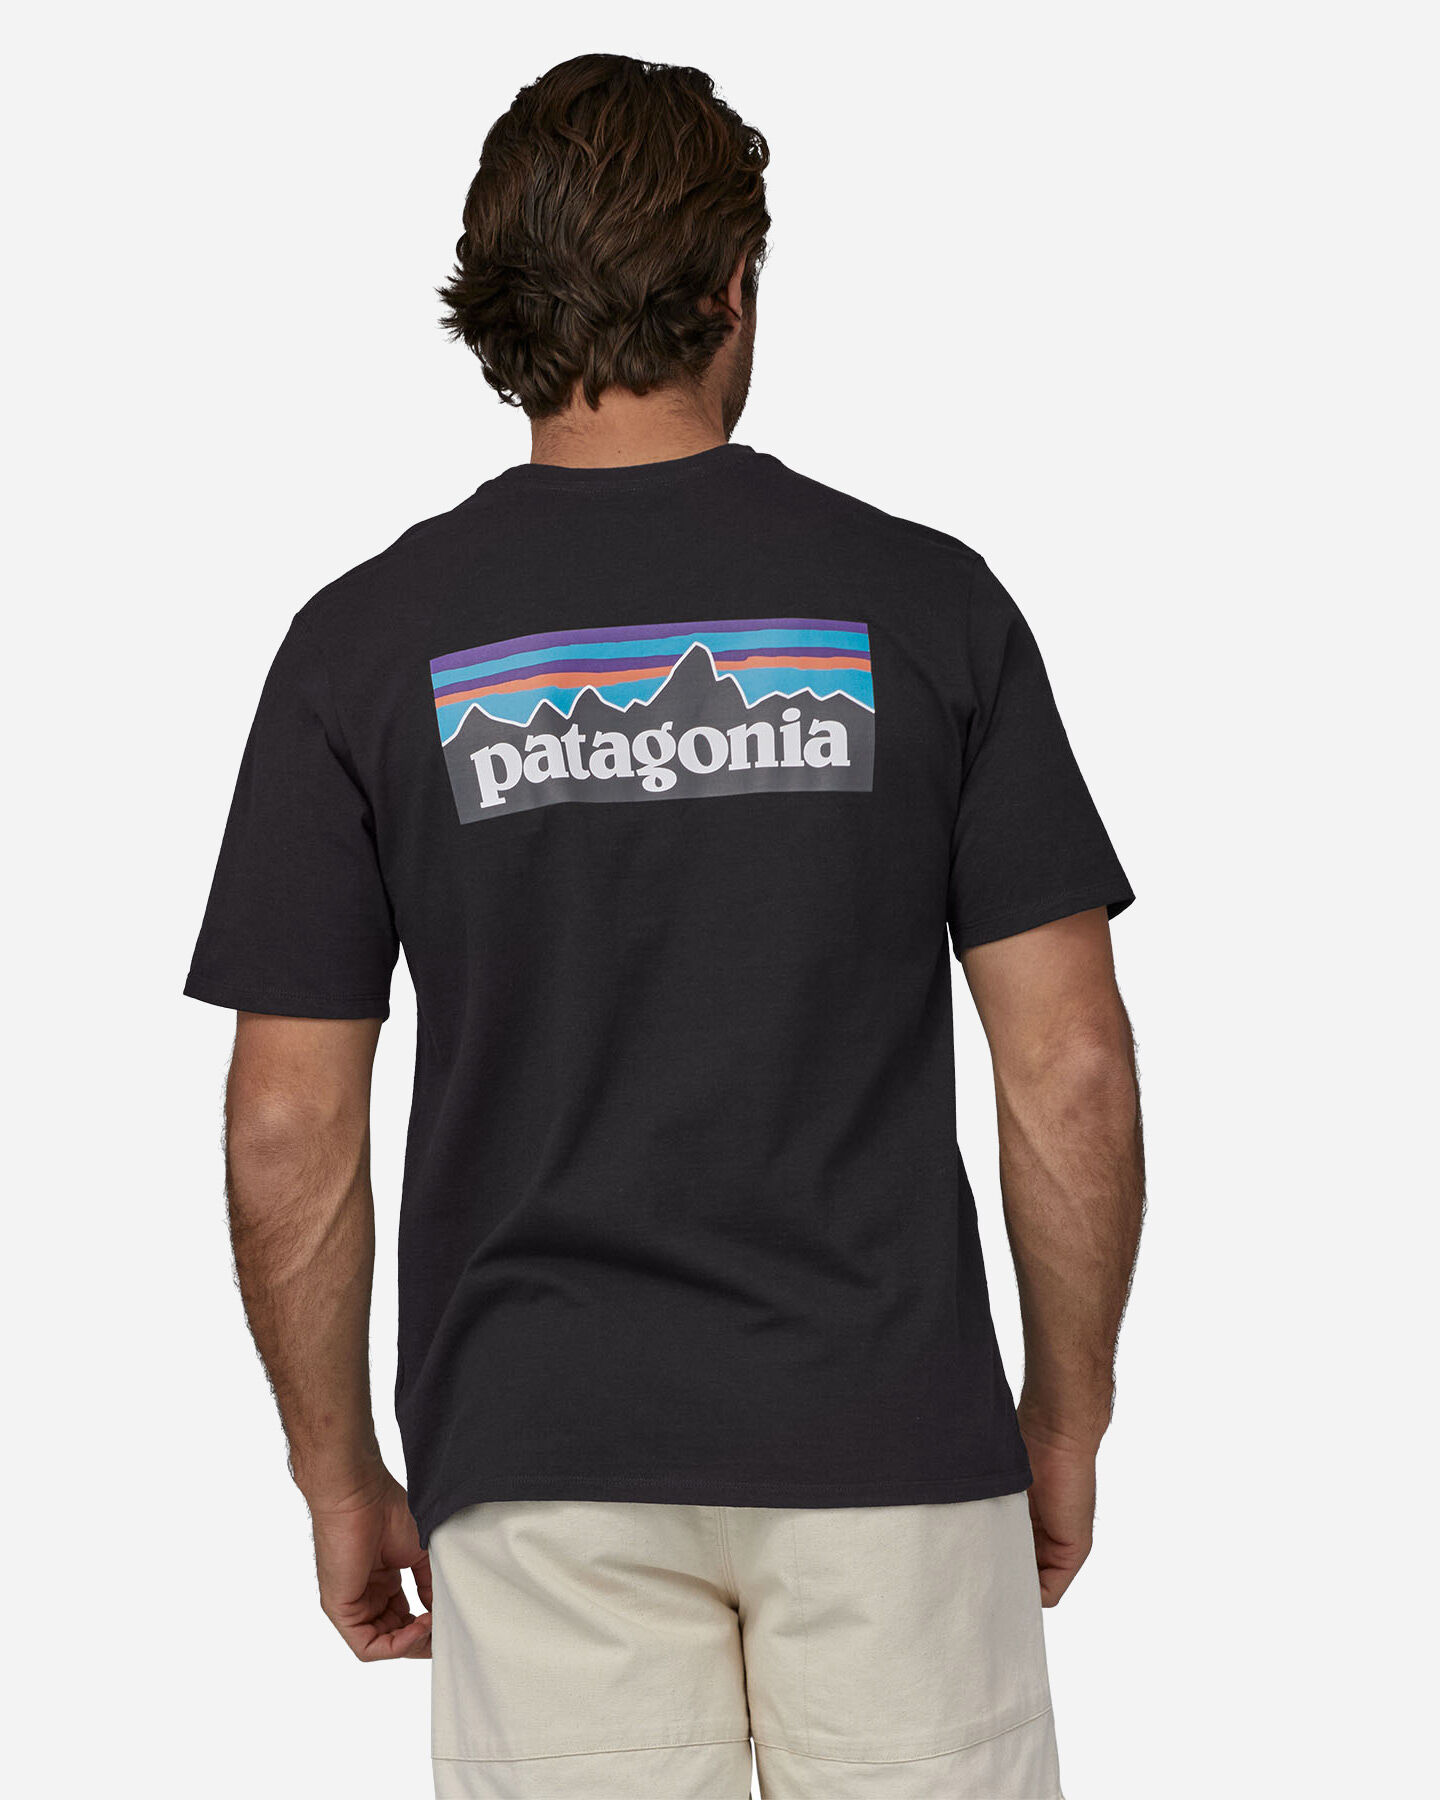  T-Shirt PATAGONIA BIG LOGO M S5443941|BLK|S scatto 3